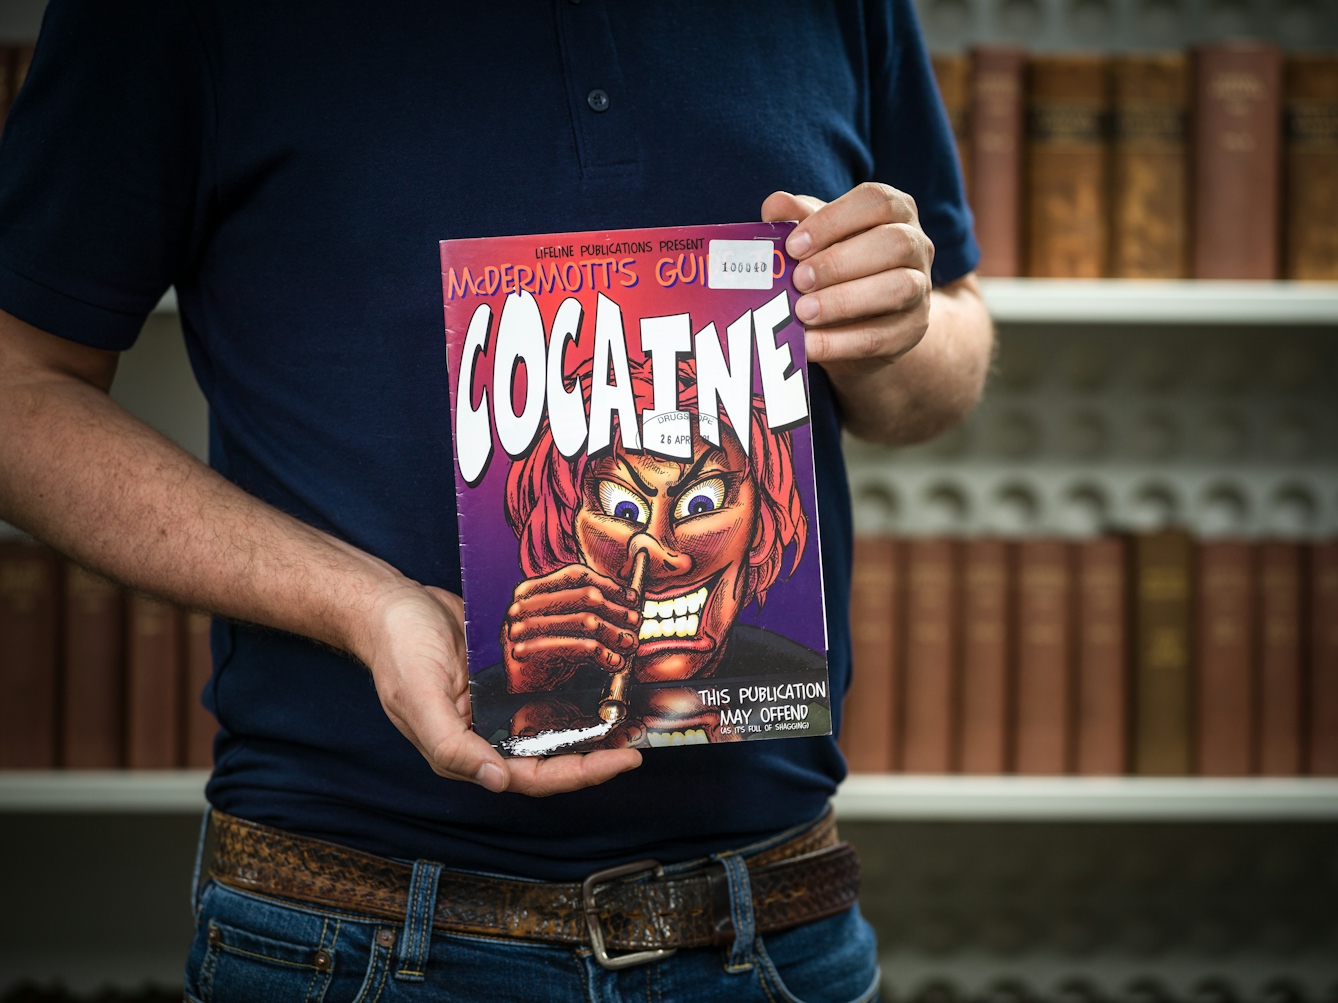 Photograph of the midriff of a man who is holding a pamphlet titled 'Cocaine, this publication may offend'. In the background are a set of out of focus shelves containing books.